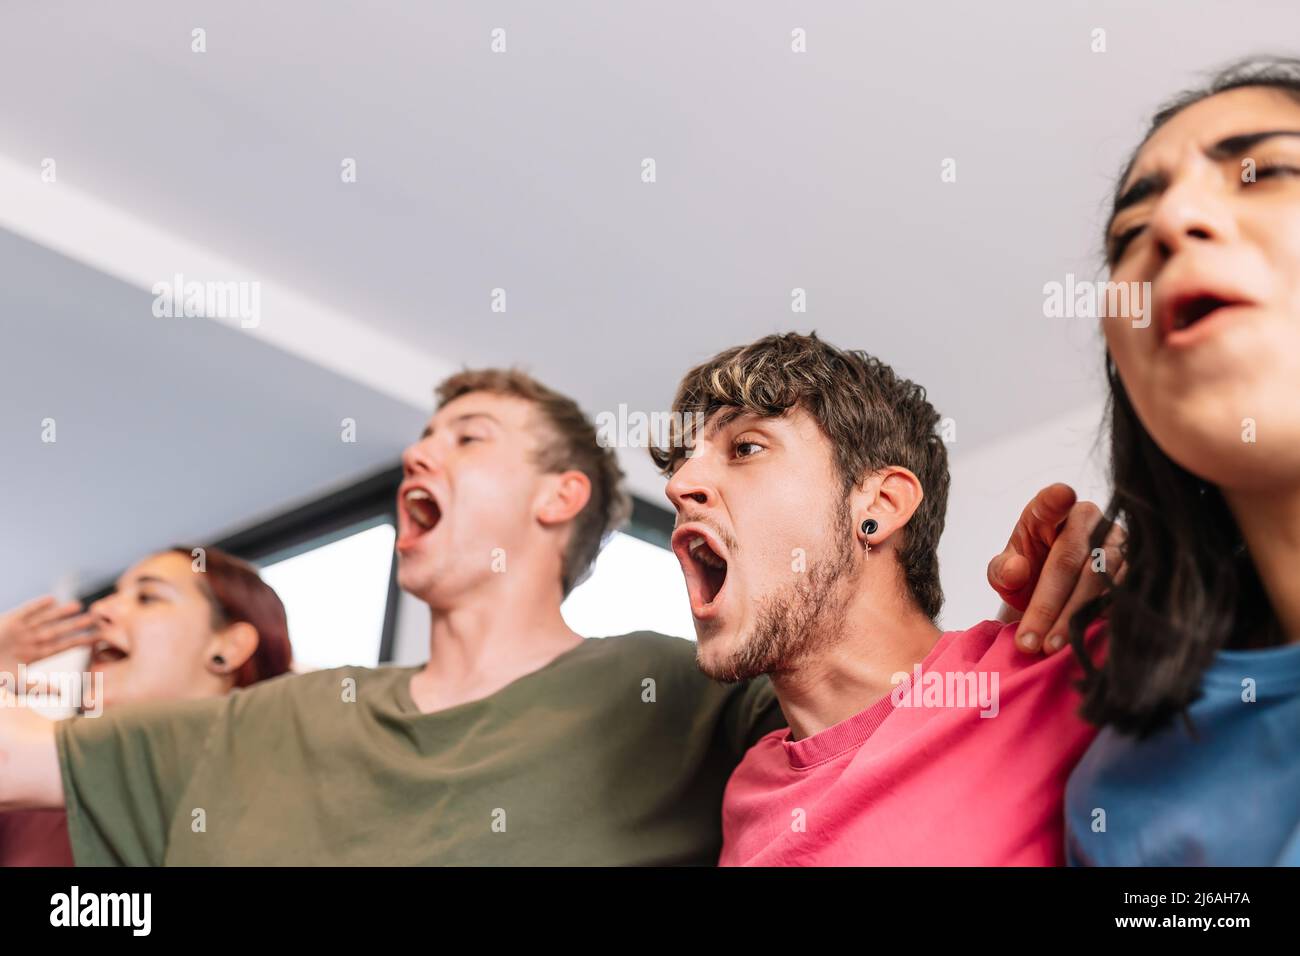 friends screaming with joy watching e-sports on TV after their team's victory. group of young people partying at home. Stock Photo